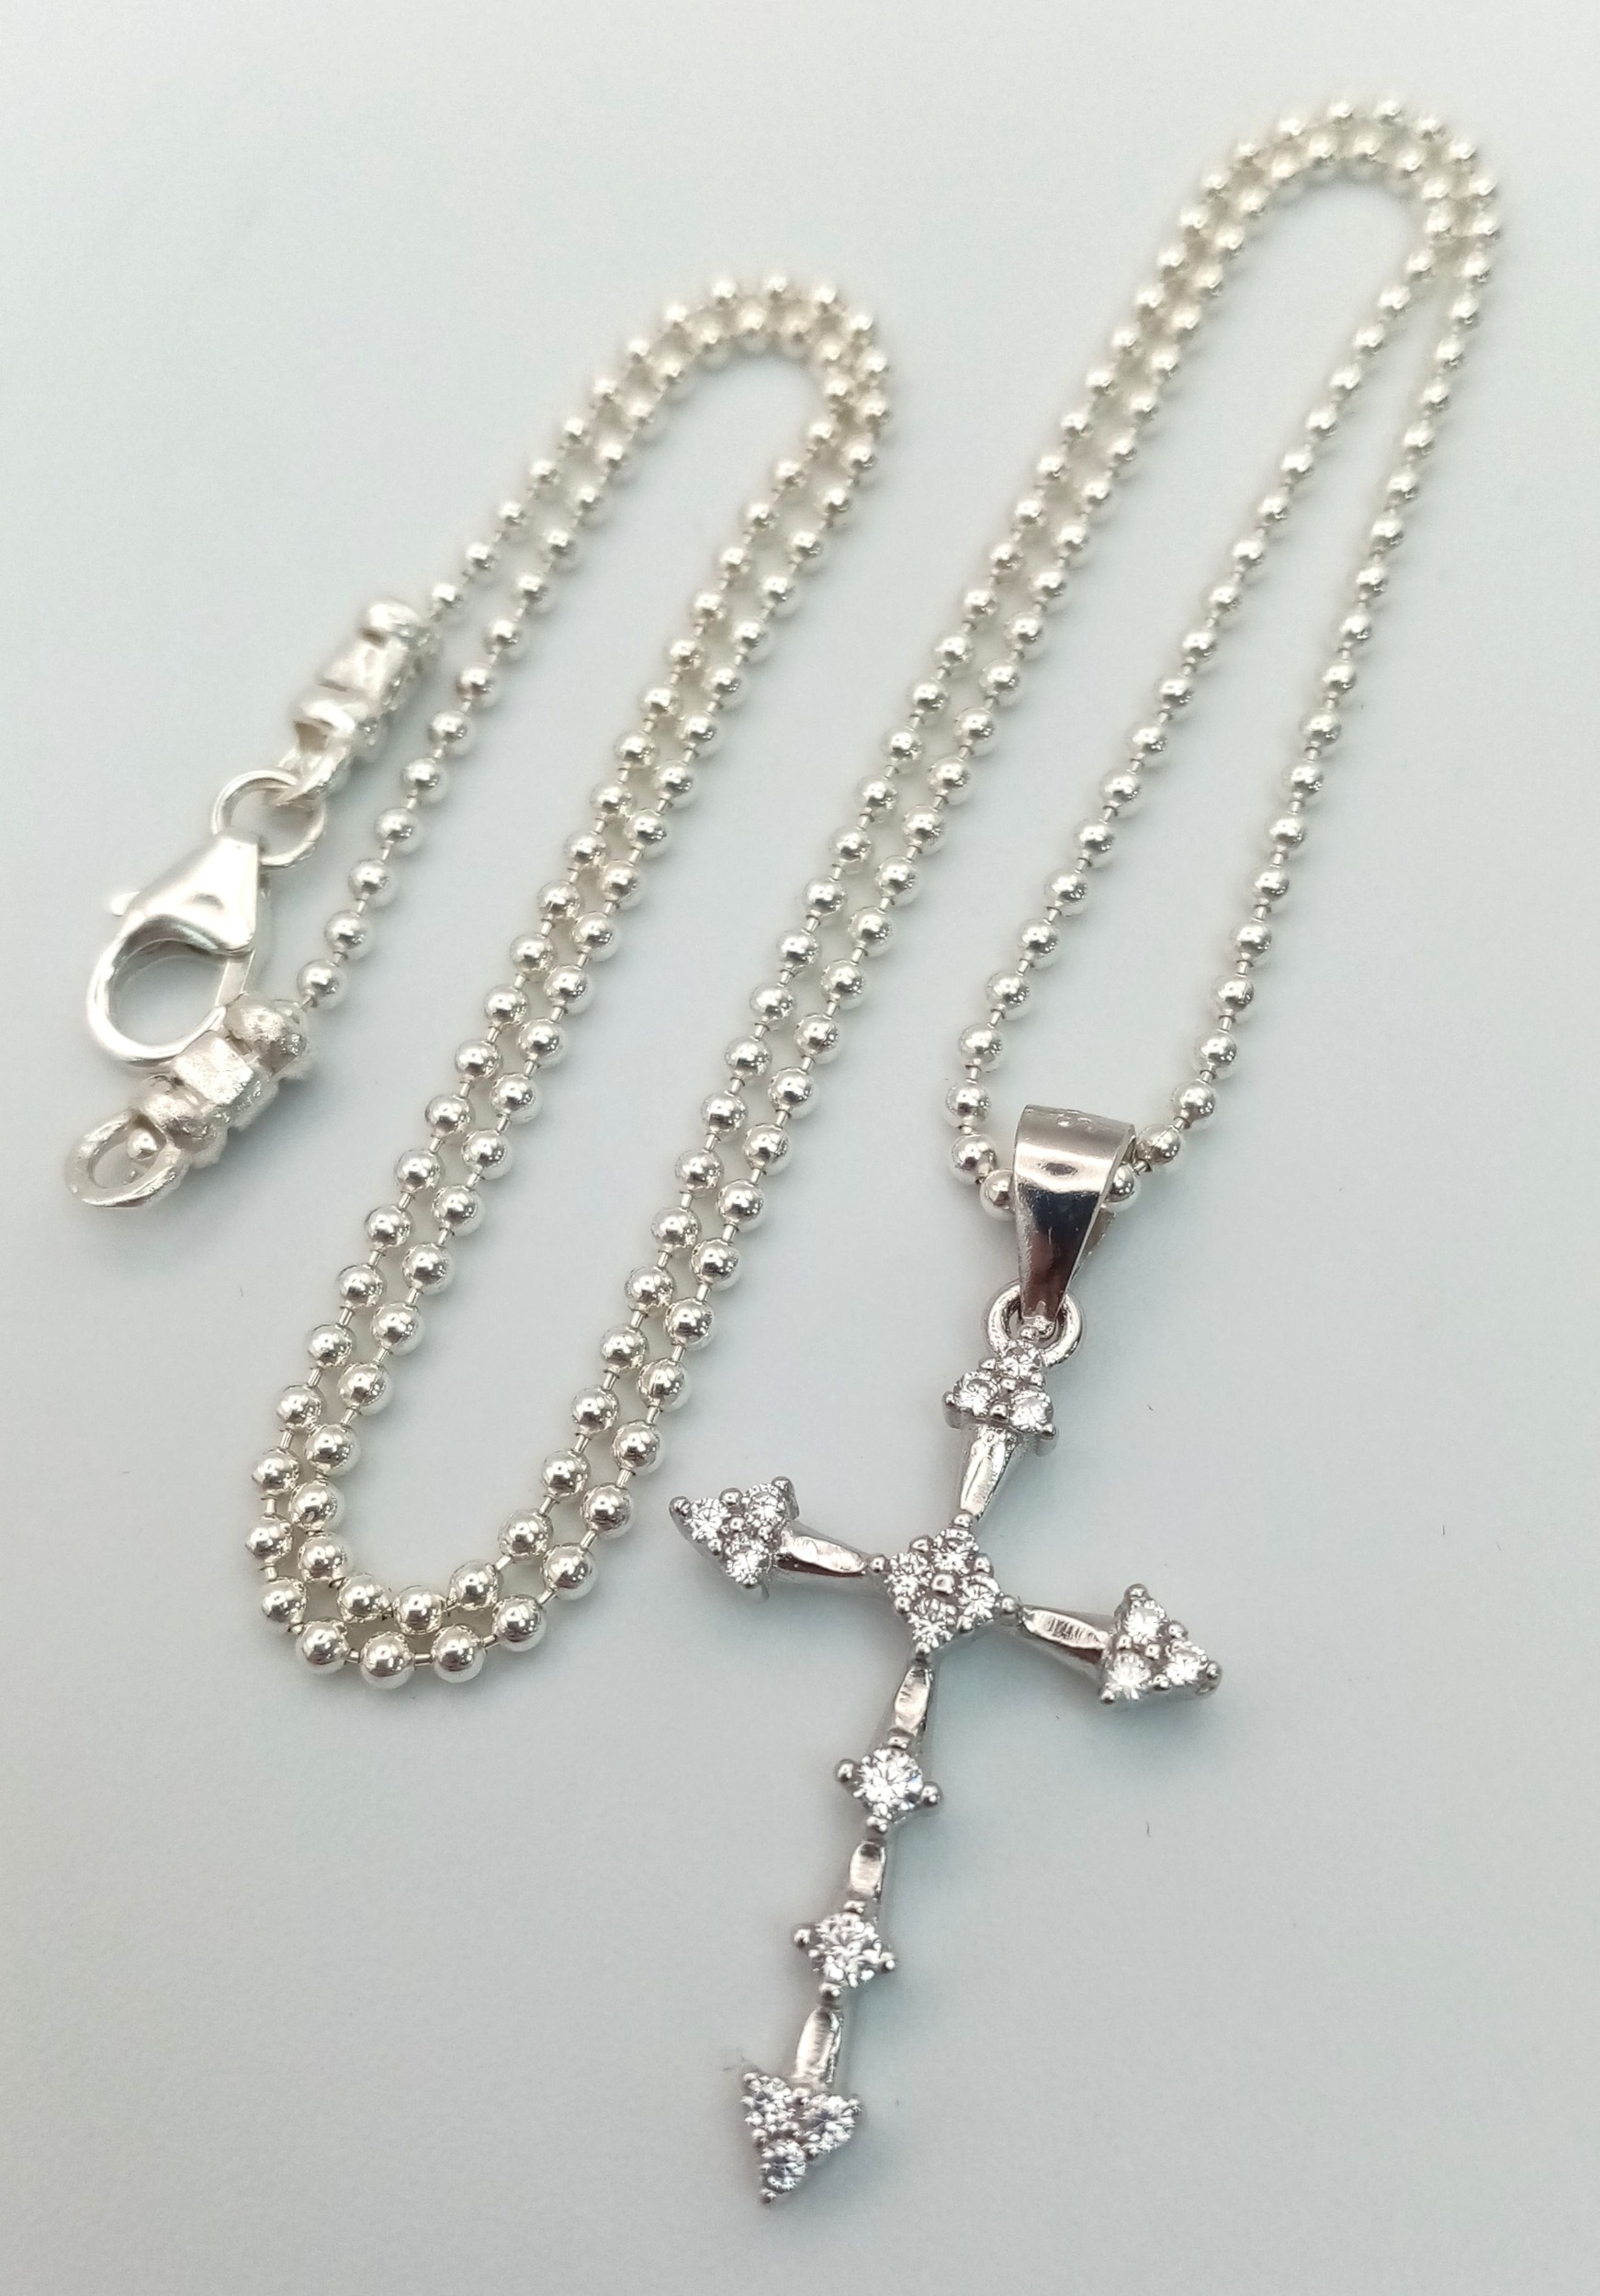 A 925 Silver Cross Pendant on a 925 Silver Chain. 3cm and 40cm.